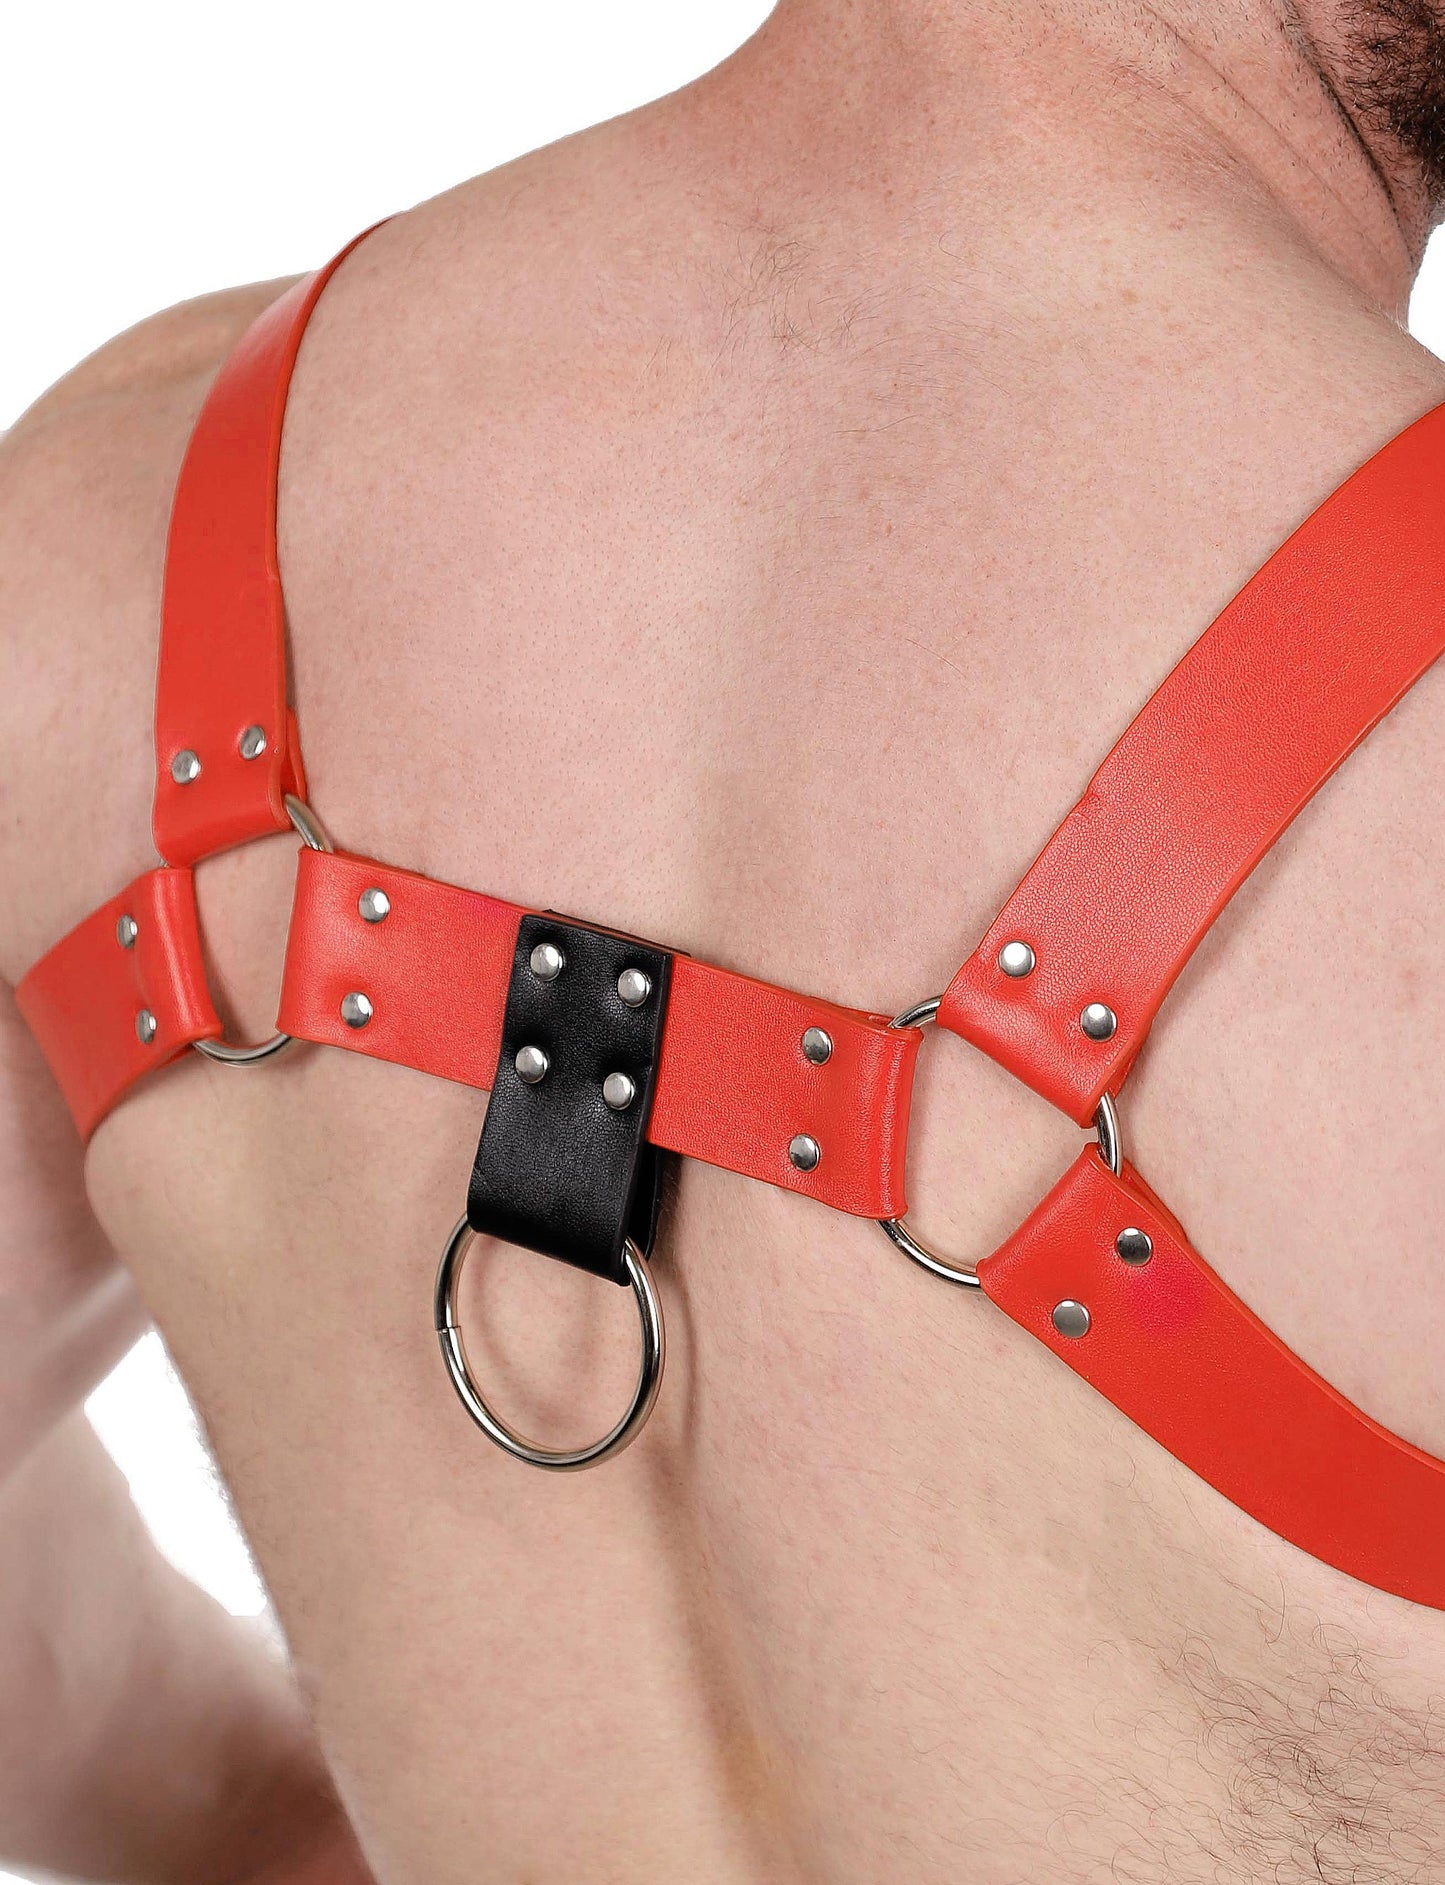 Vegan Leather Red and Black Harness